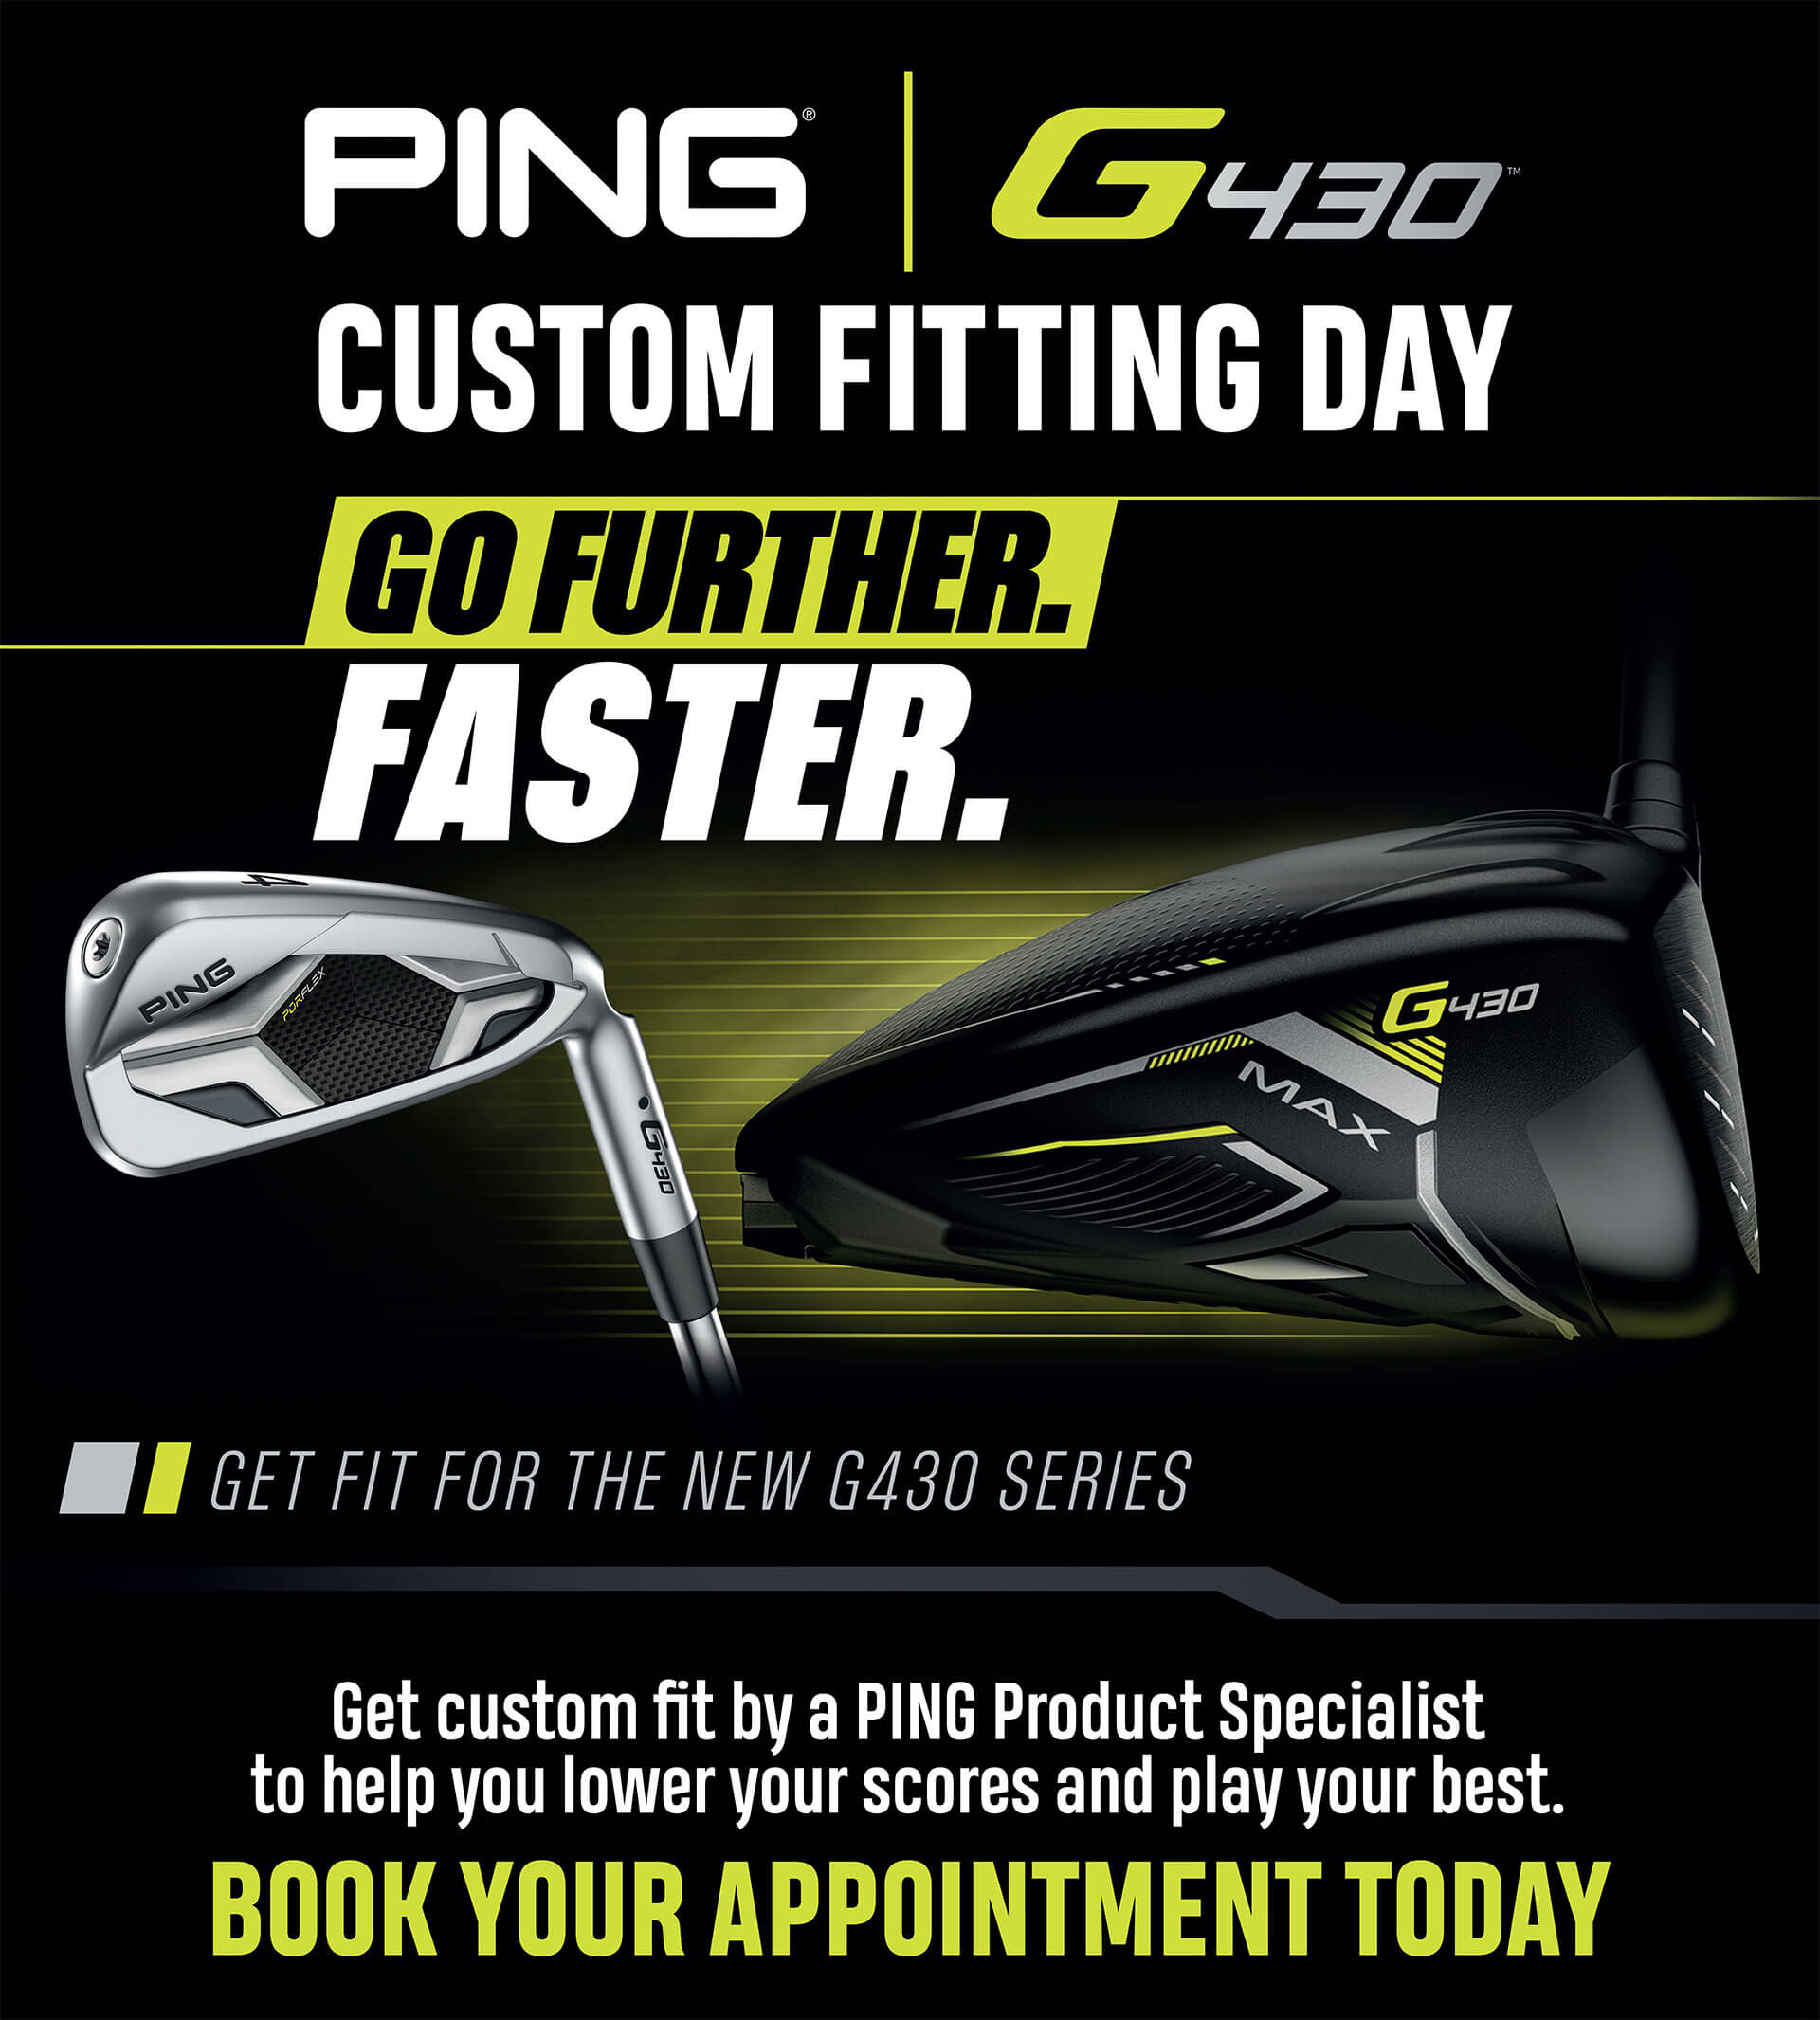 Ping Fitting Day